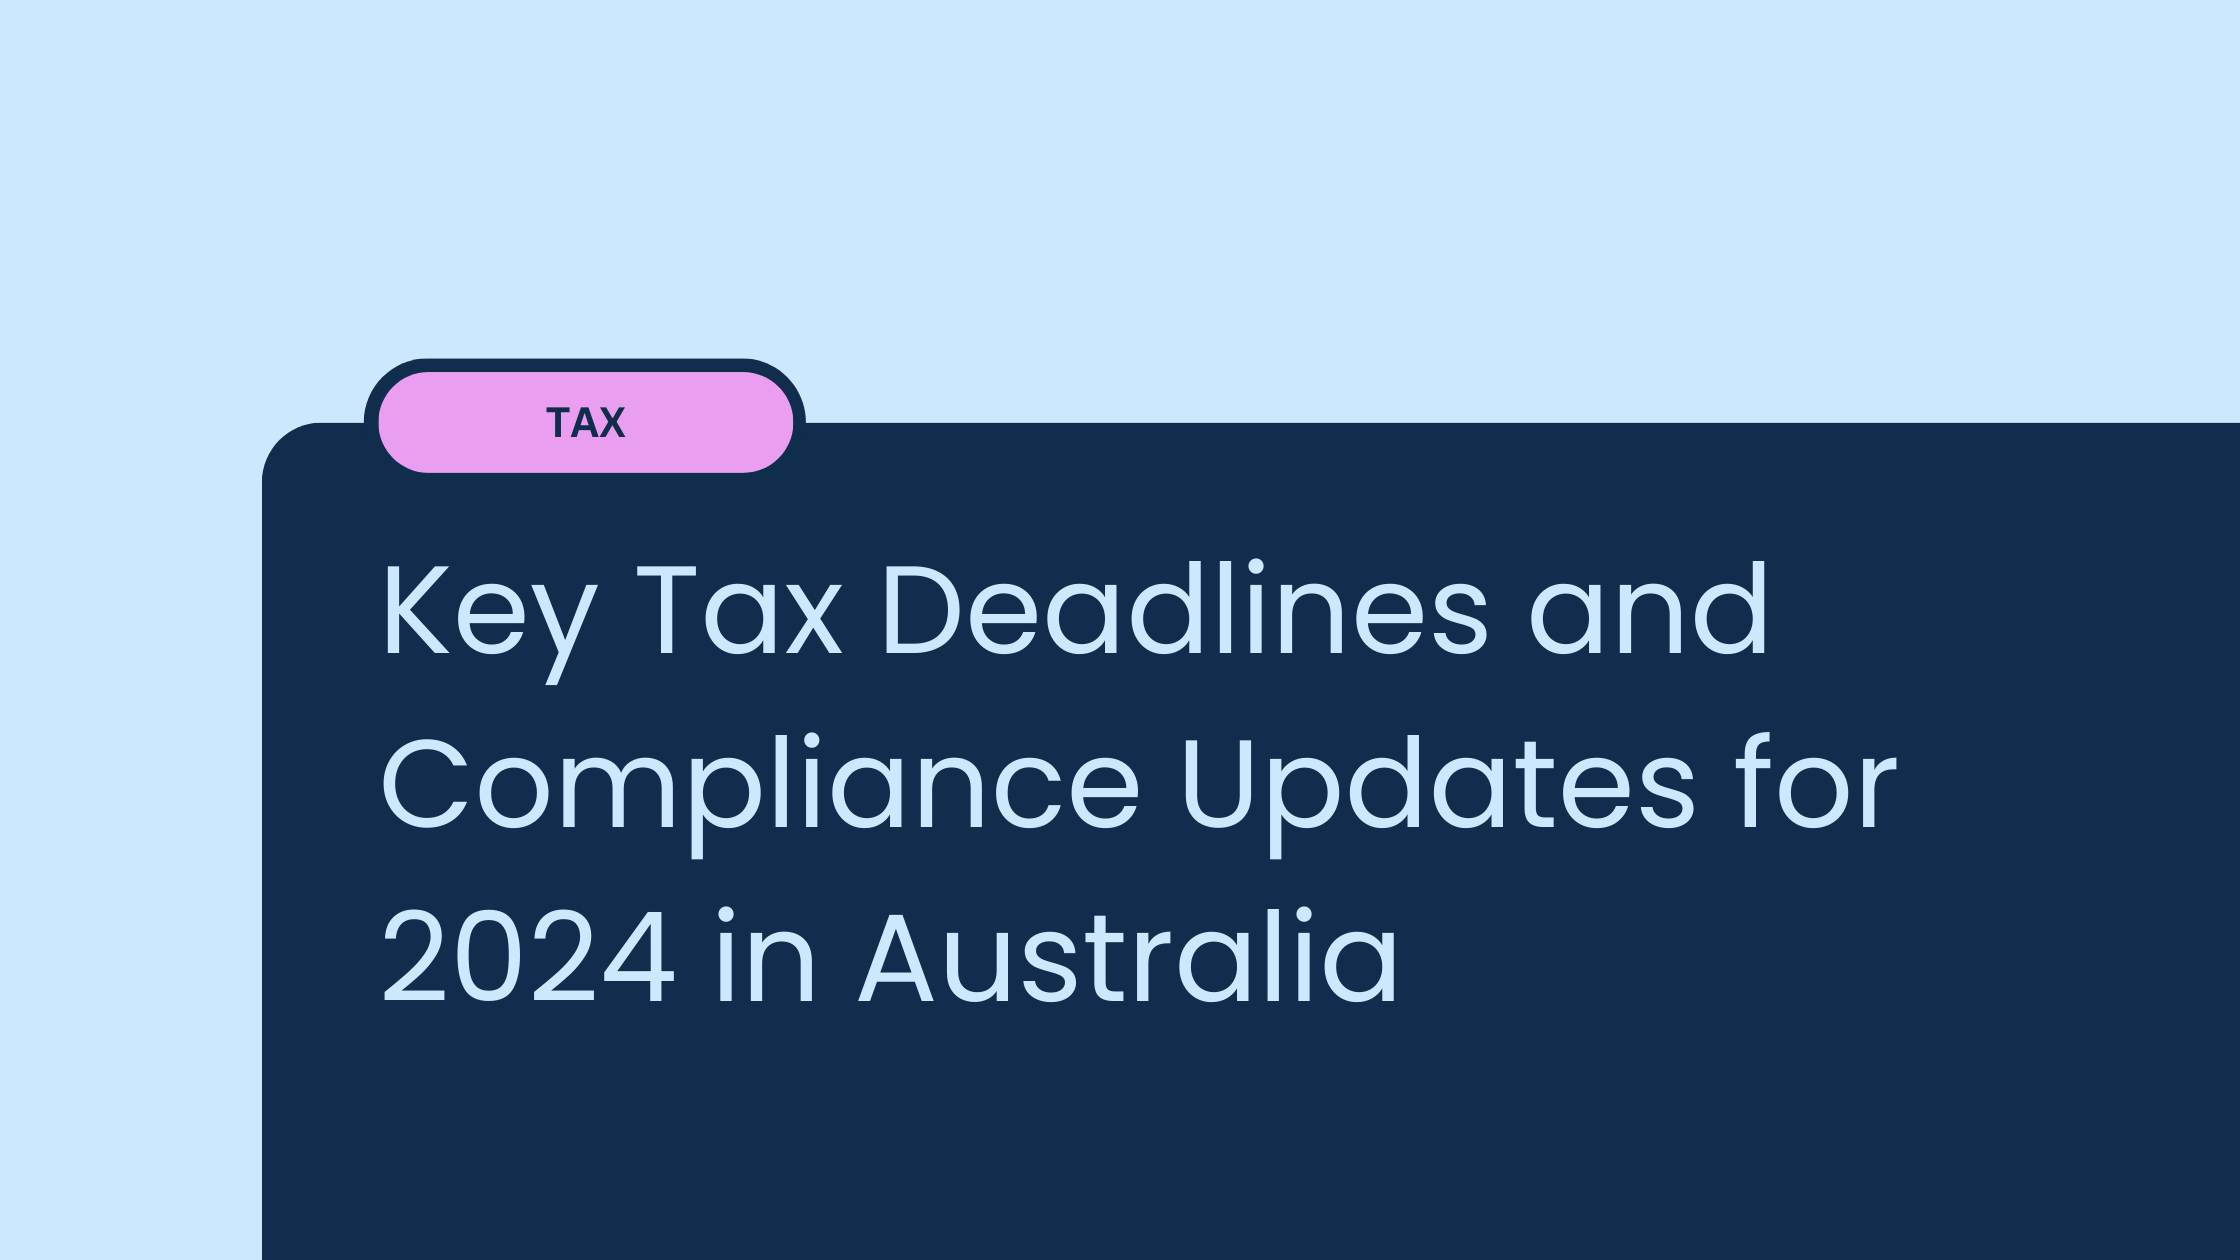 Key Tax Deadlines and Compliance Updates for 2024 in Australia